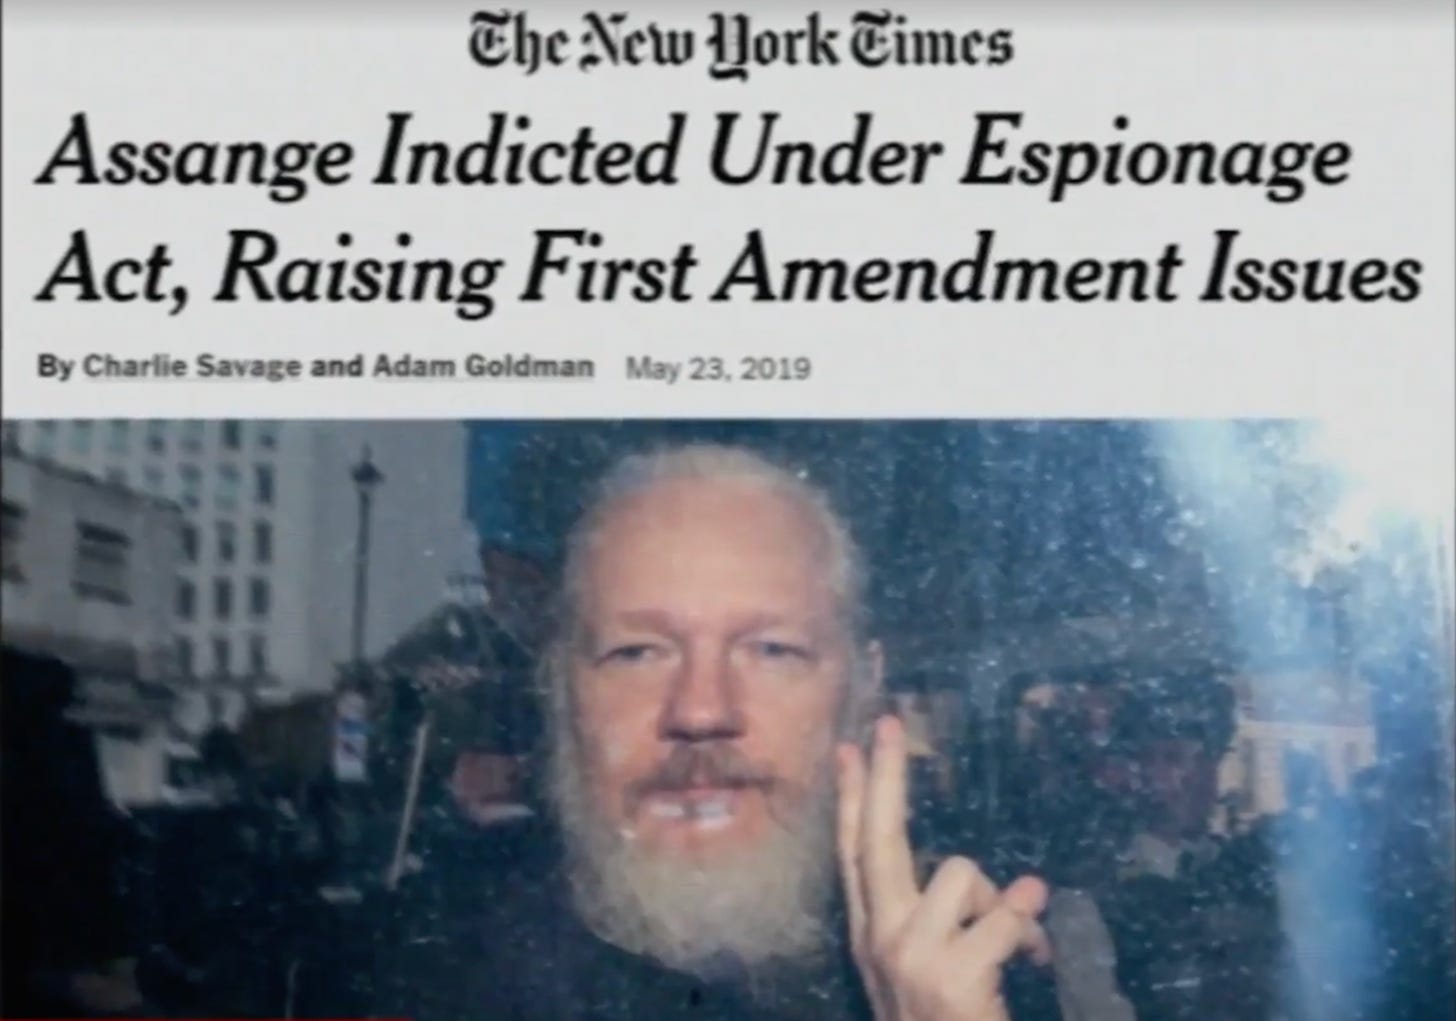 A New York Times headline, "Assange Indicted Under Espionage Act, Raising First Amendment Issues" appears over a picture of a bearded Julian Assange holding up two fingers.